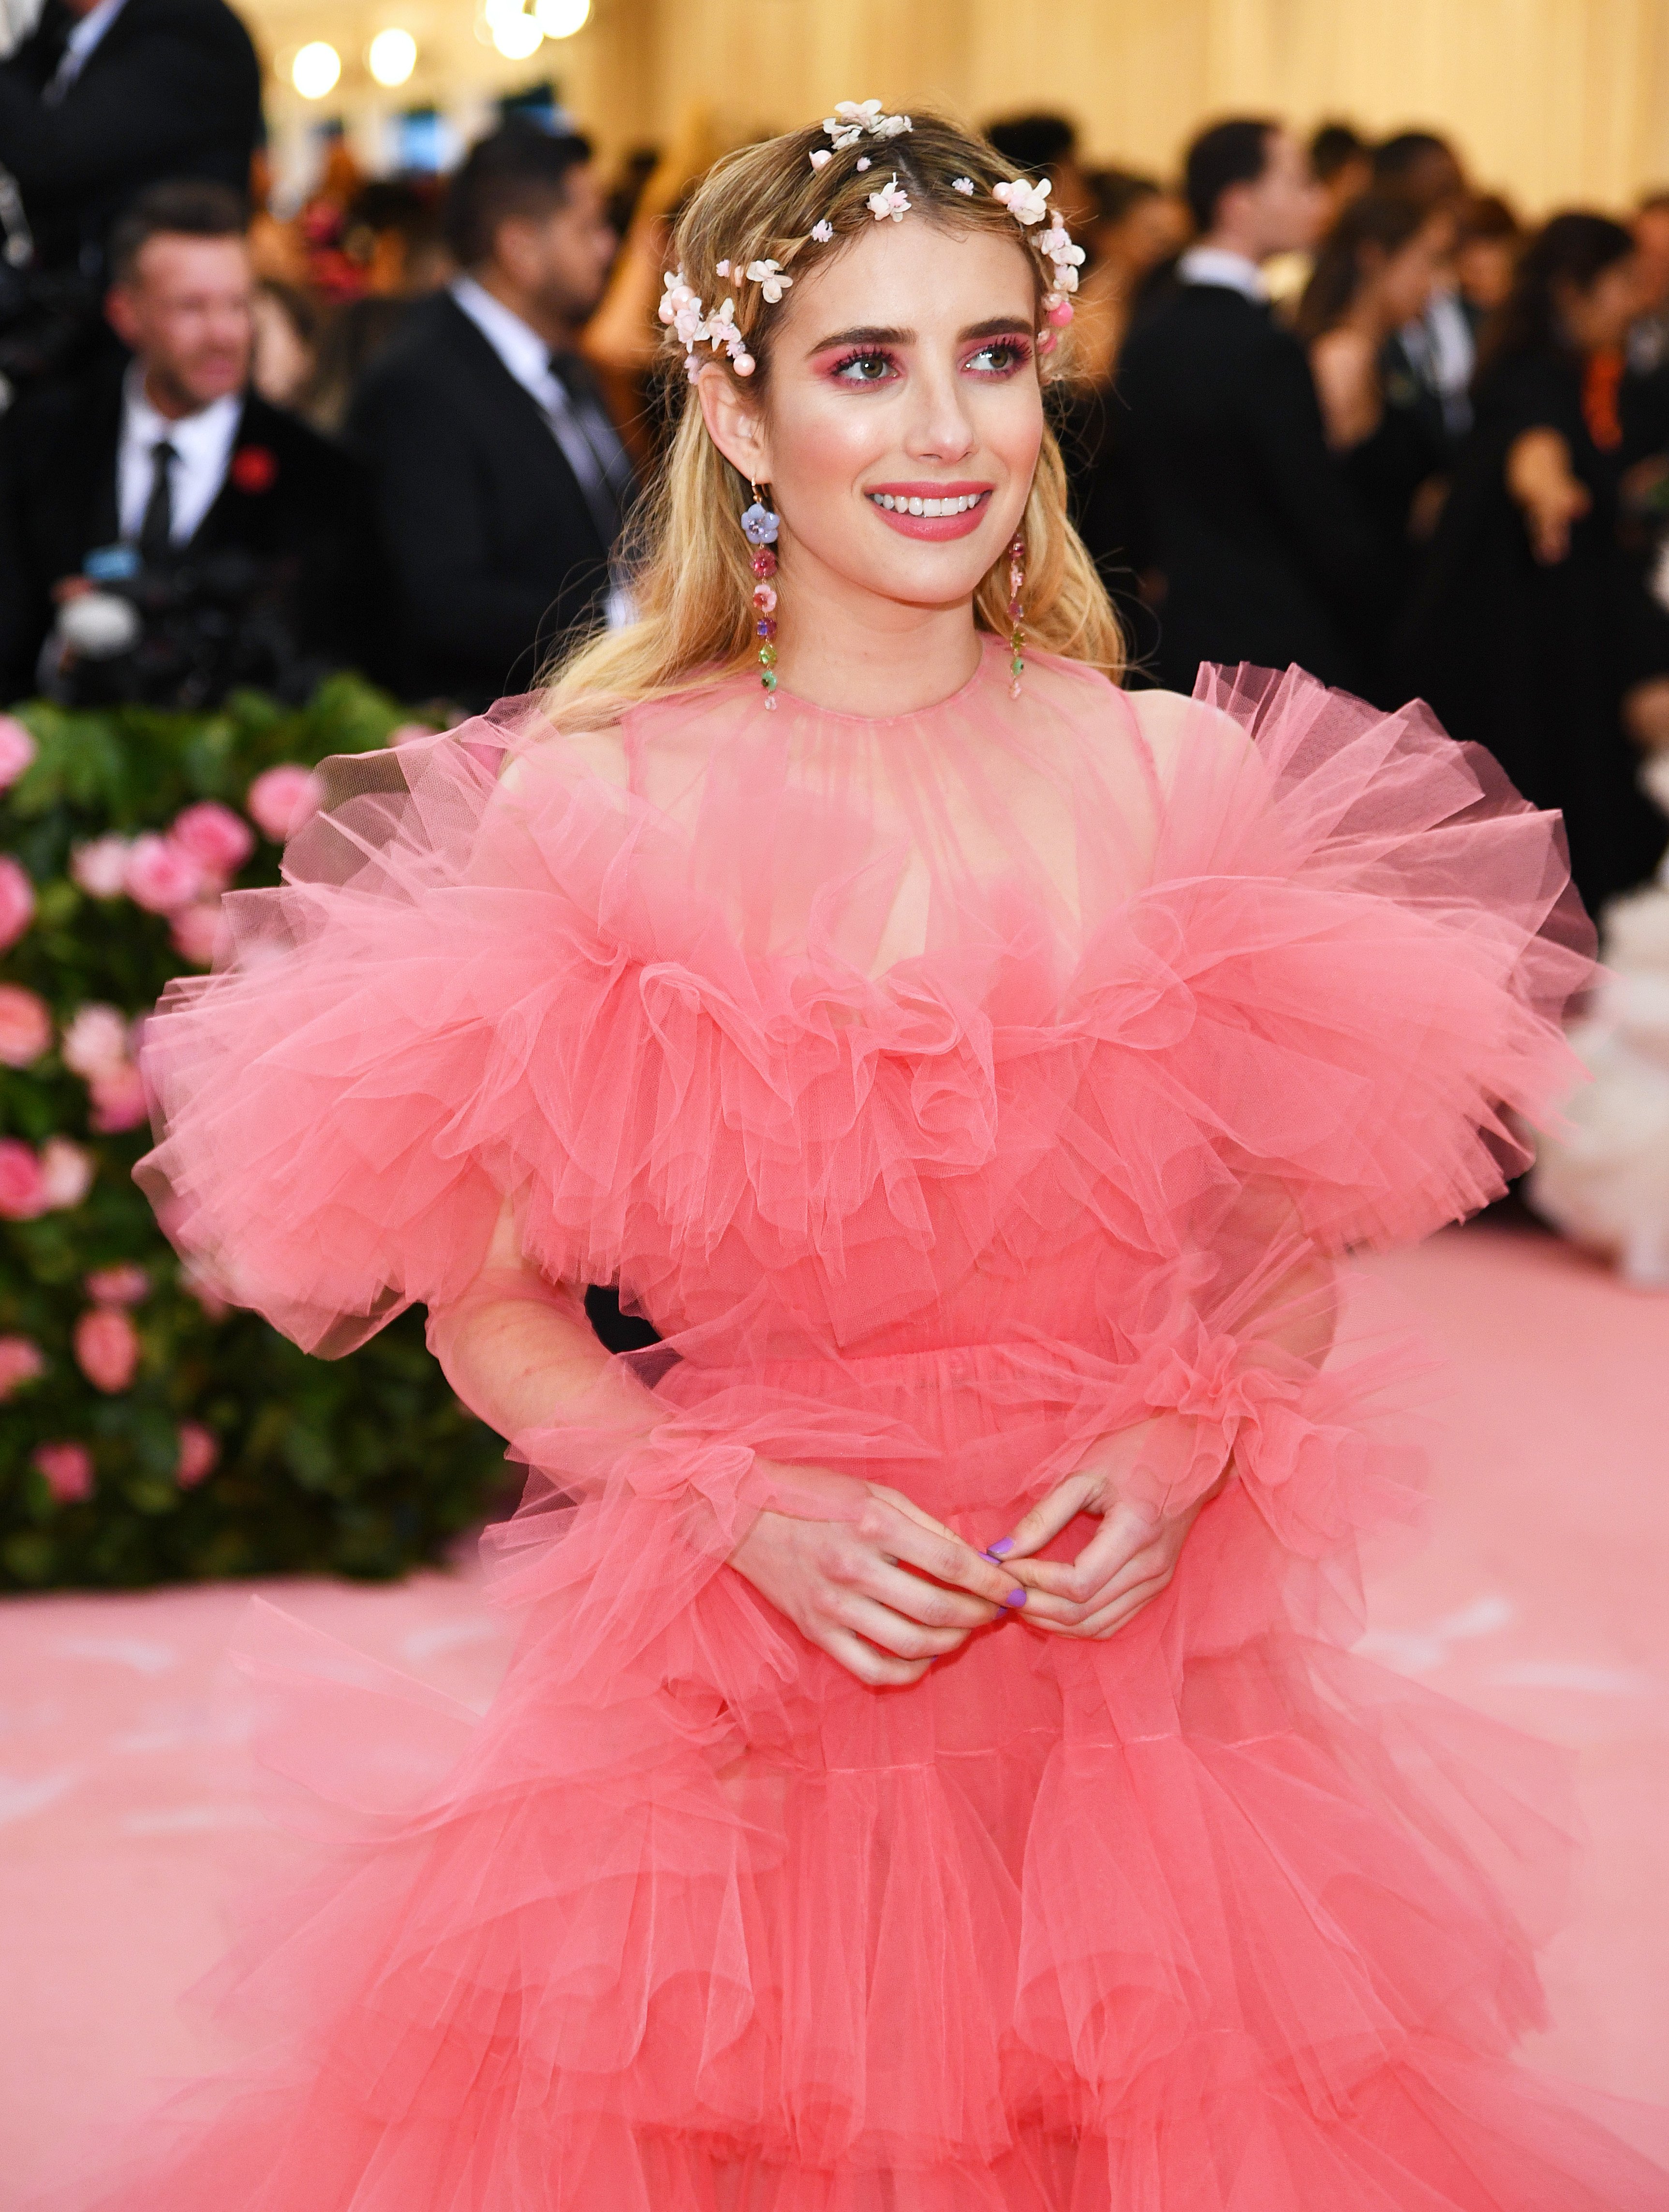 Emma Roberts at the 2019 Met Gala on May 6, 2019 in New York City. | Photo: Getty Images